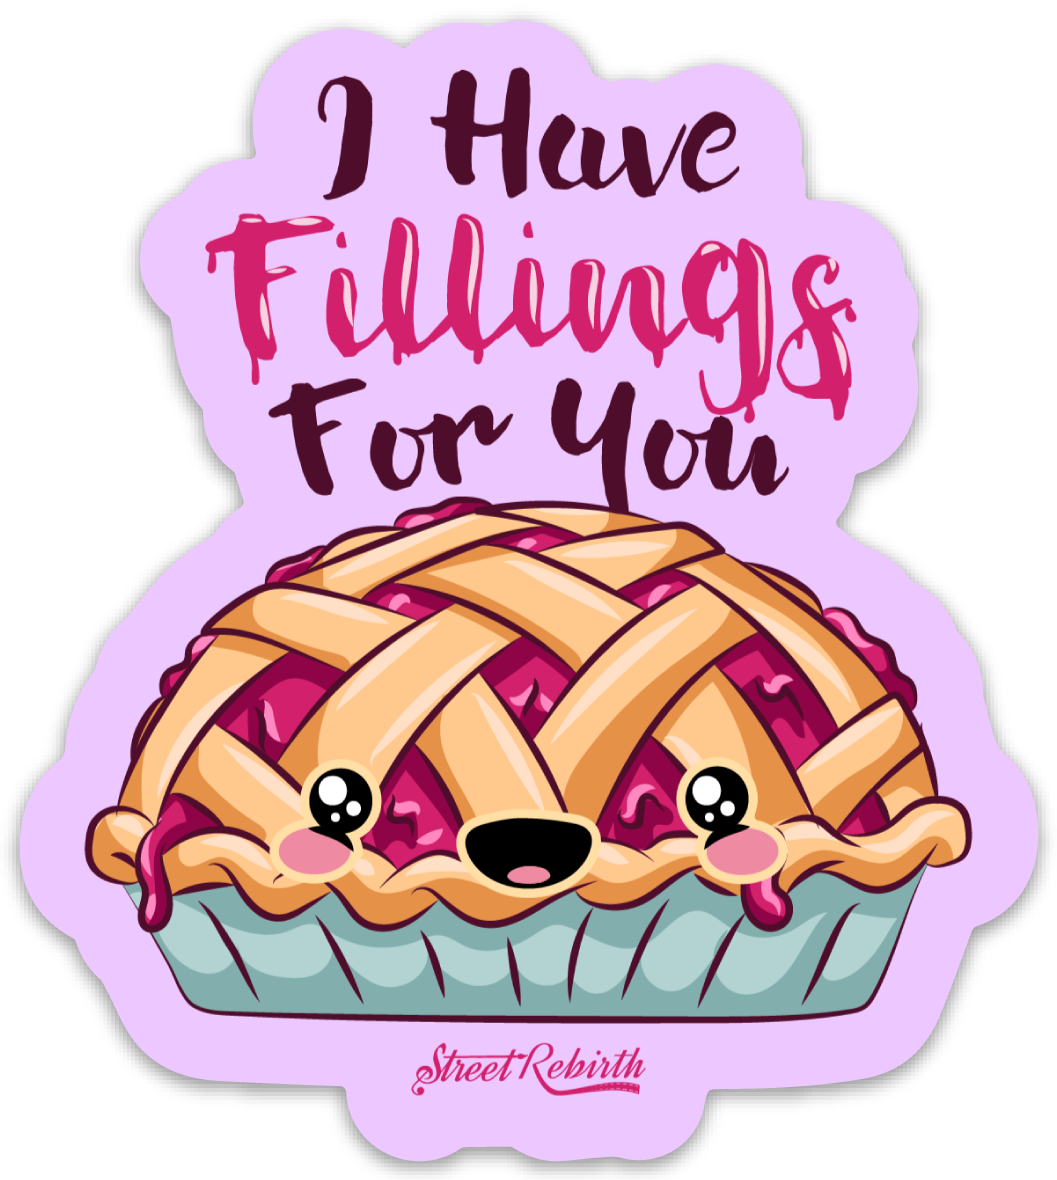 I Have Fillings for You PUN STICKER – ONE 4 INCH WATER PROOF VINYL STICKER – FOR HYDRO FLASK, SKATEBOARD, LAPTOP, PLANNER, CAR, COLLECTING, GIFTING